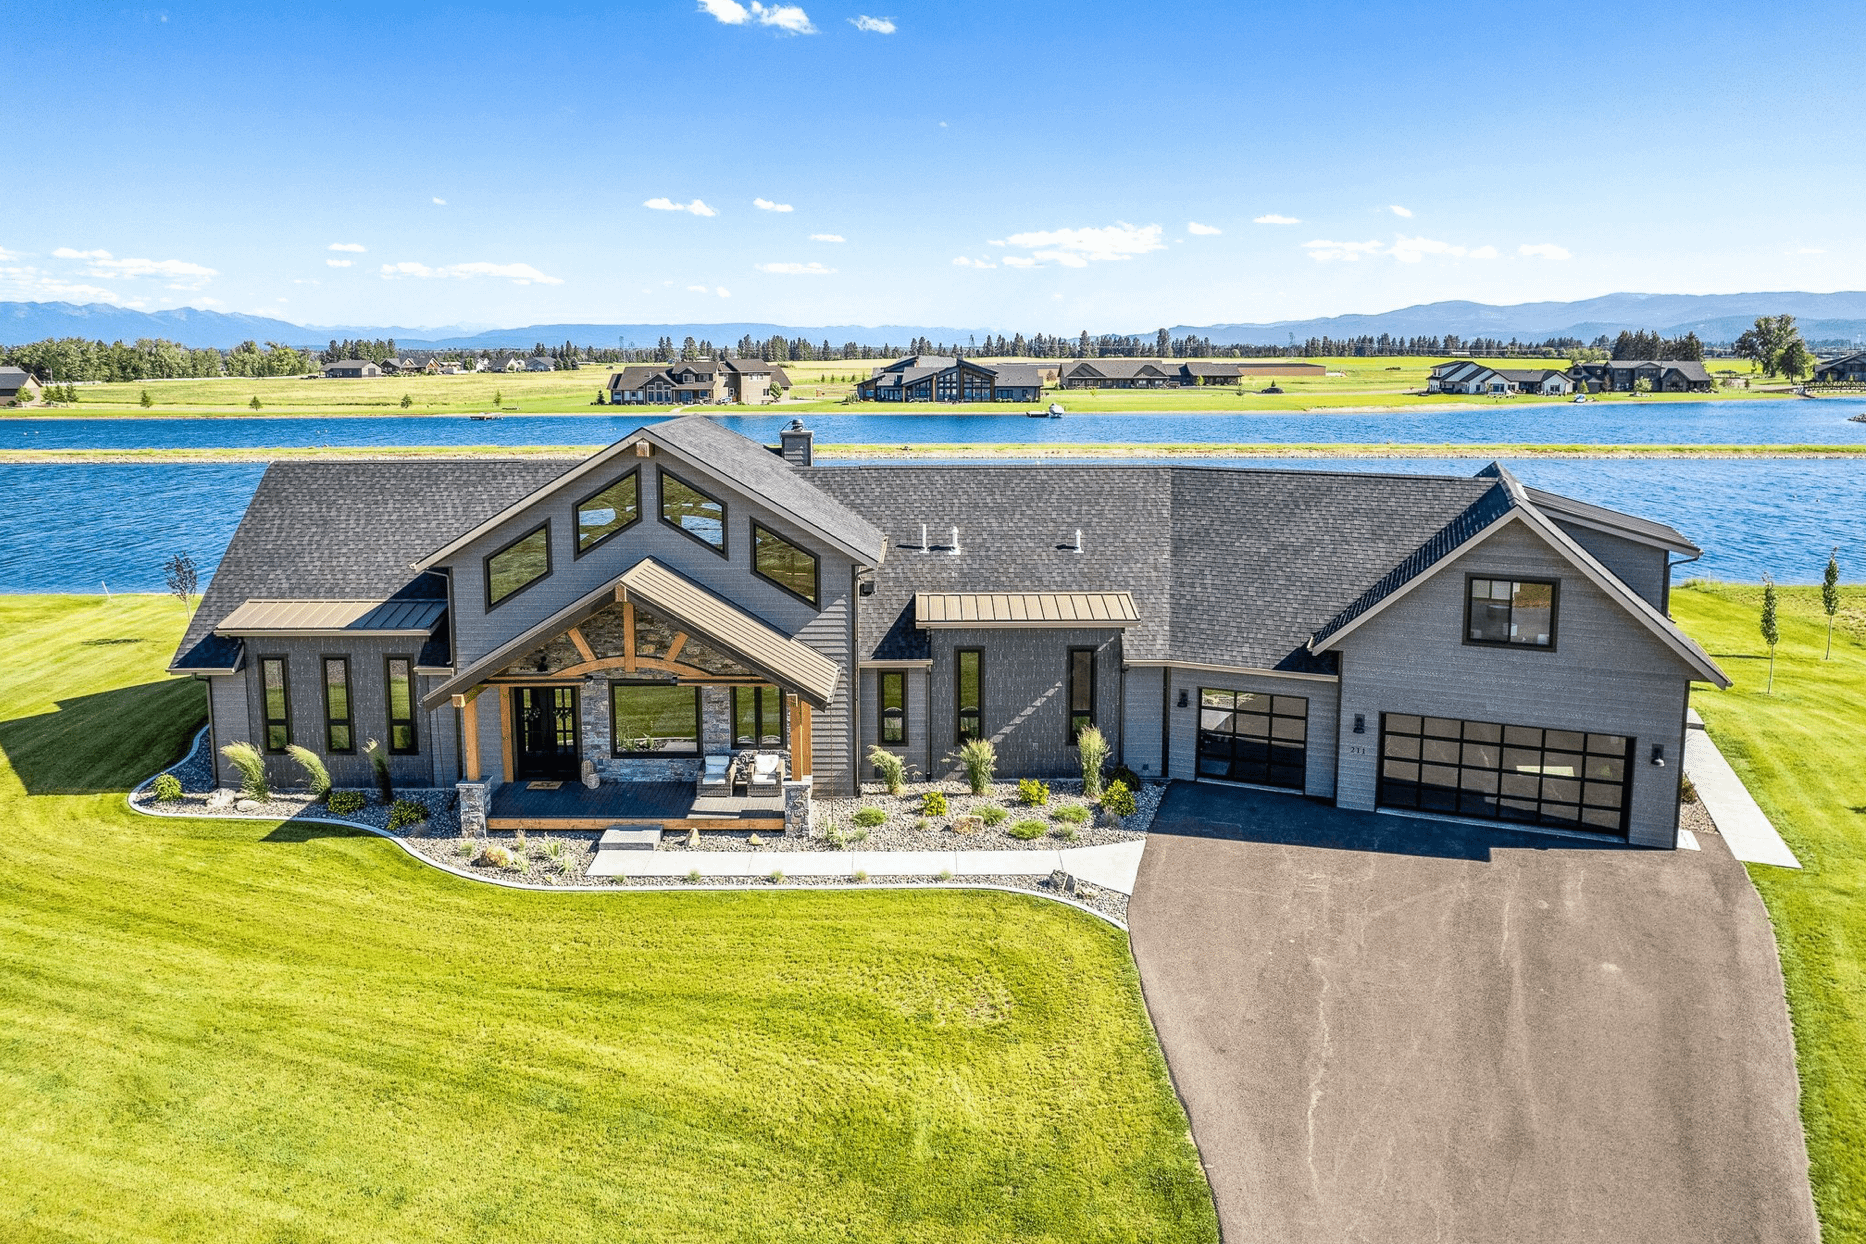 Luxury Waterfront Home In Kalispell, Montana (PHOTOS)